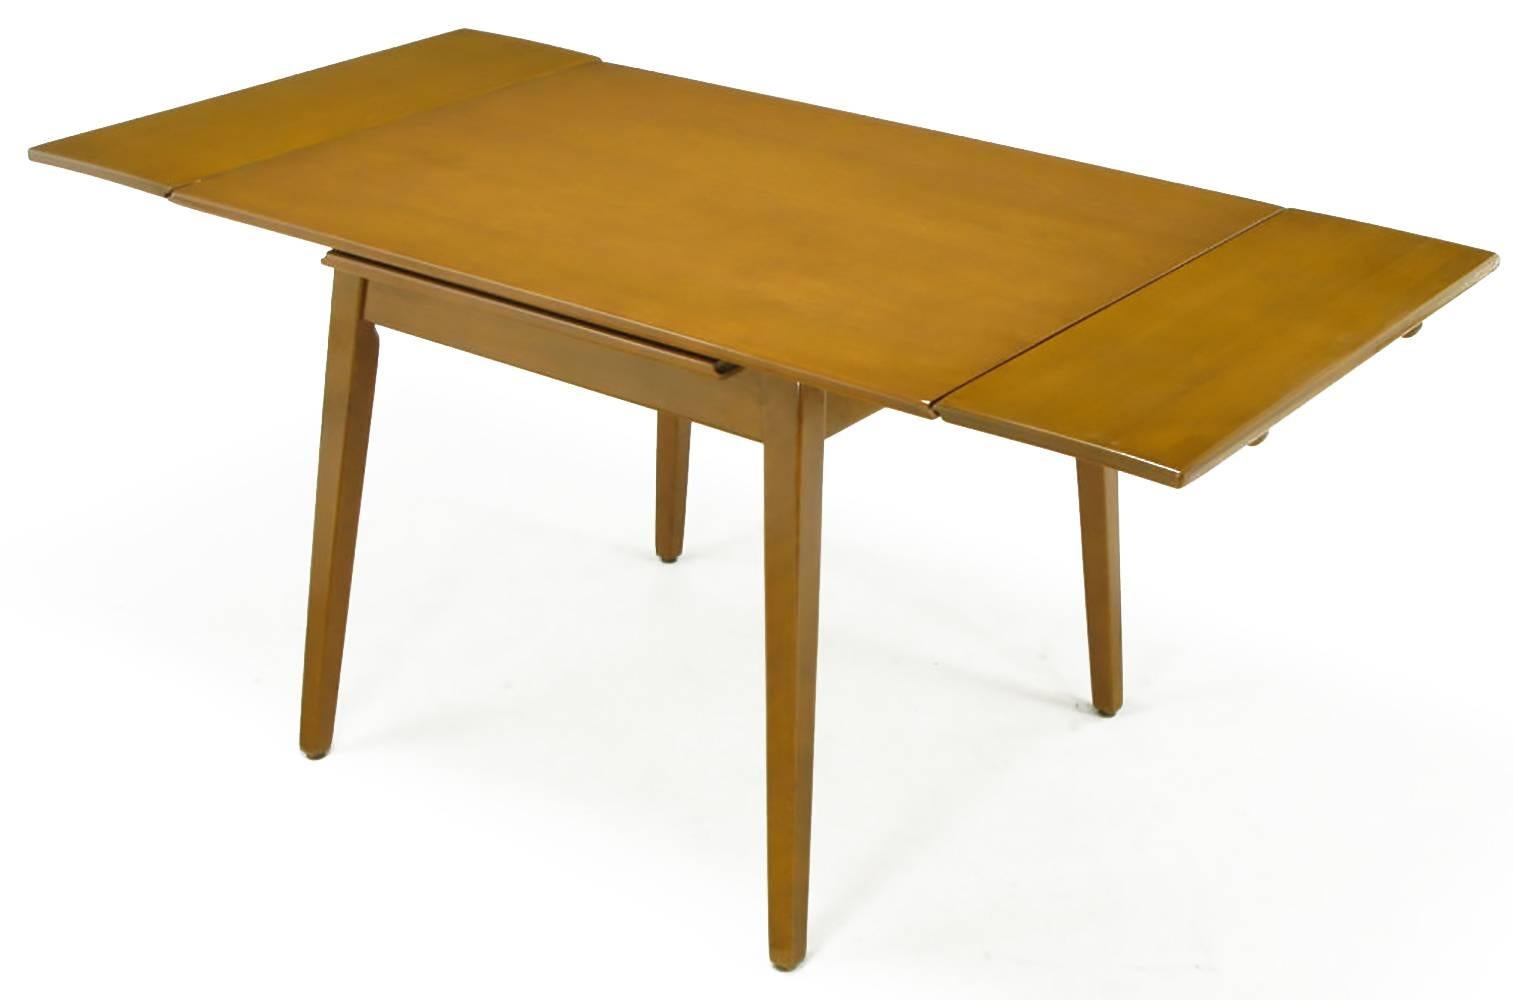 A petite dining table in birch from the Contemporary Line of the Imperial Furniture Company, circa 1950s. Perfect for a smaller space with the ability to expand to 62